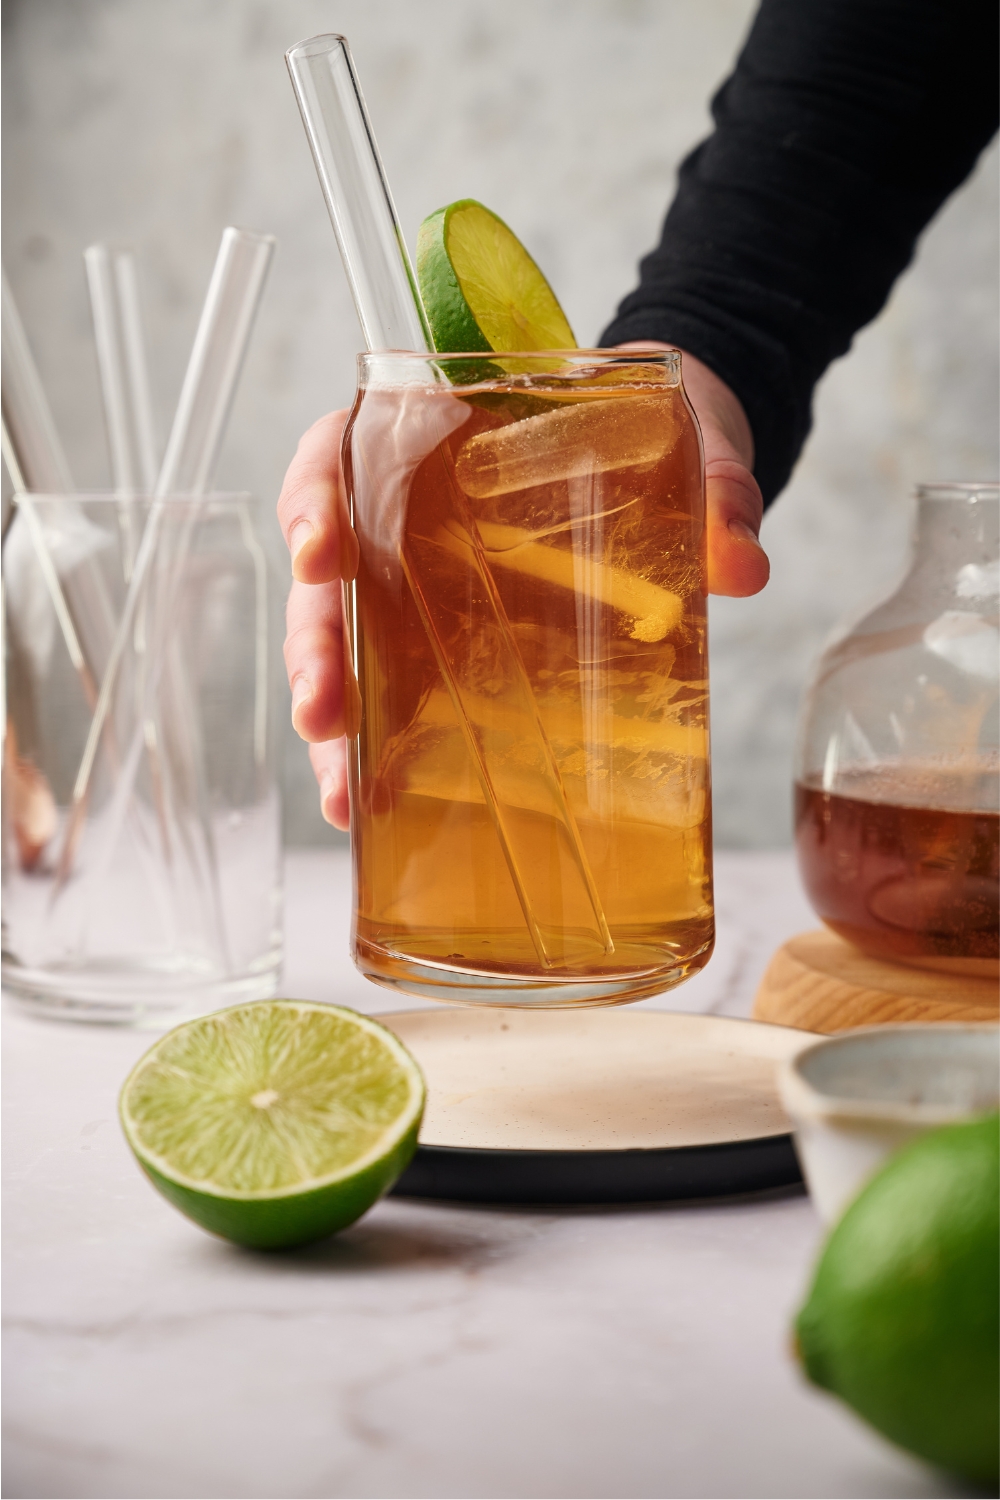 A hand grabbing a glass of iced tea off a plate. The glass has a straw and a lime wedge in it.